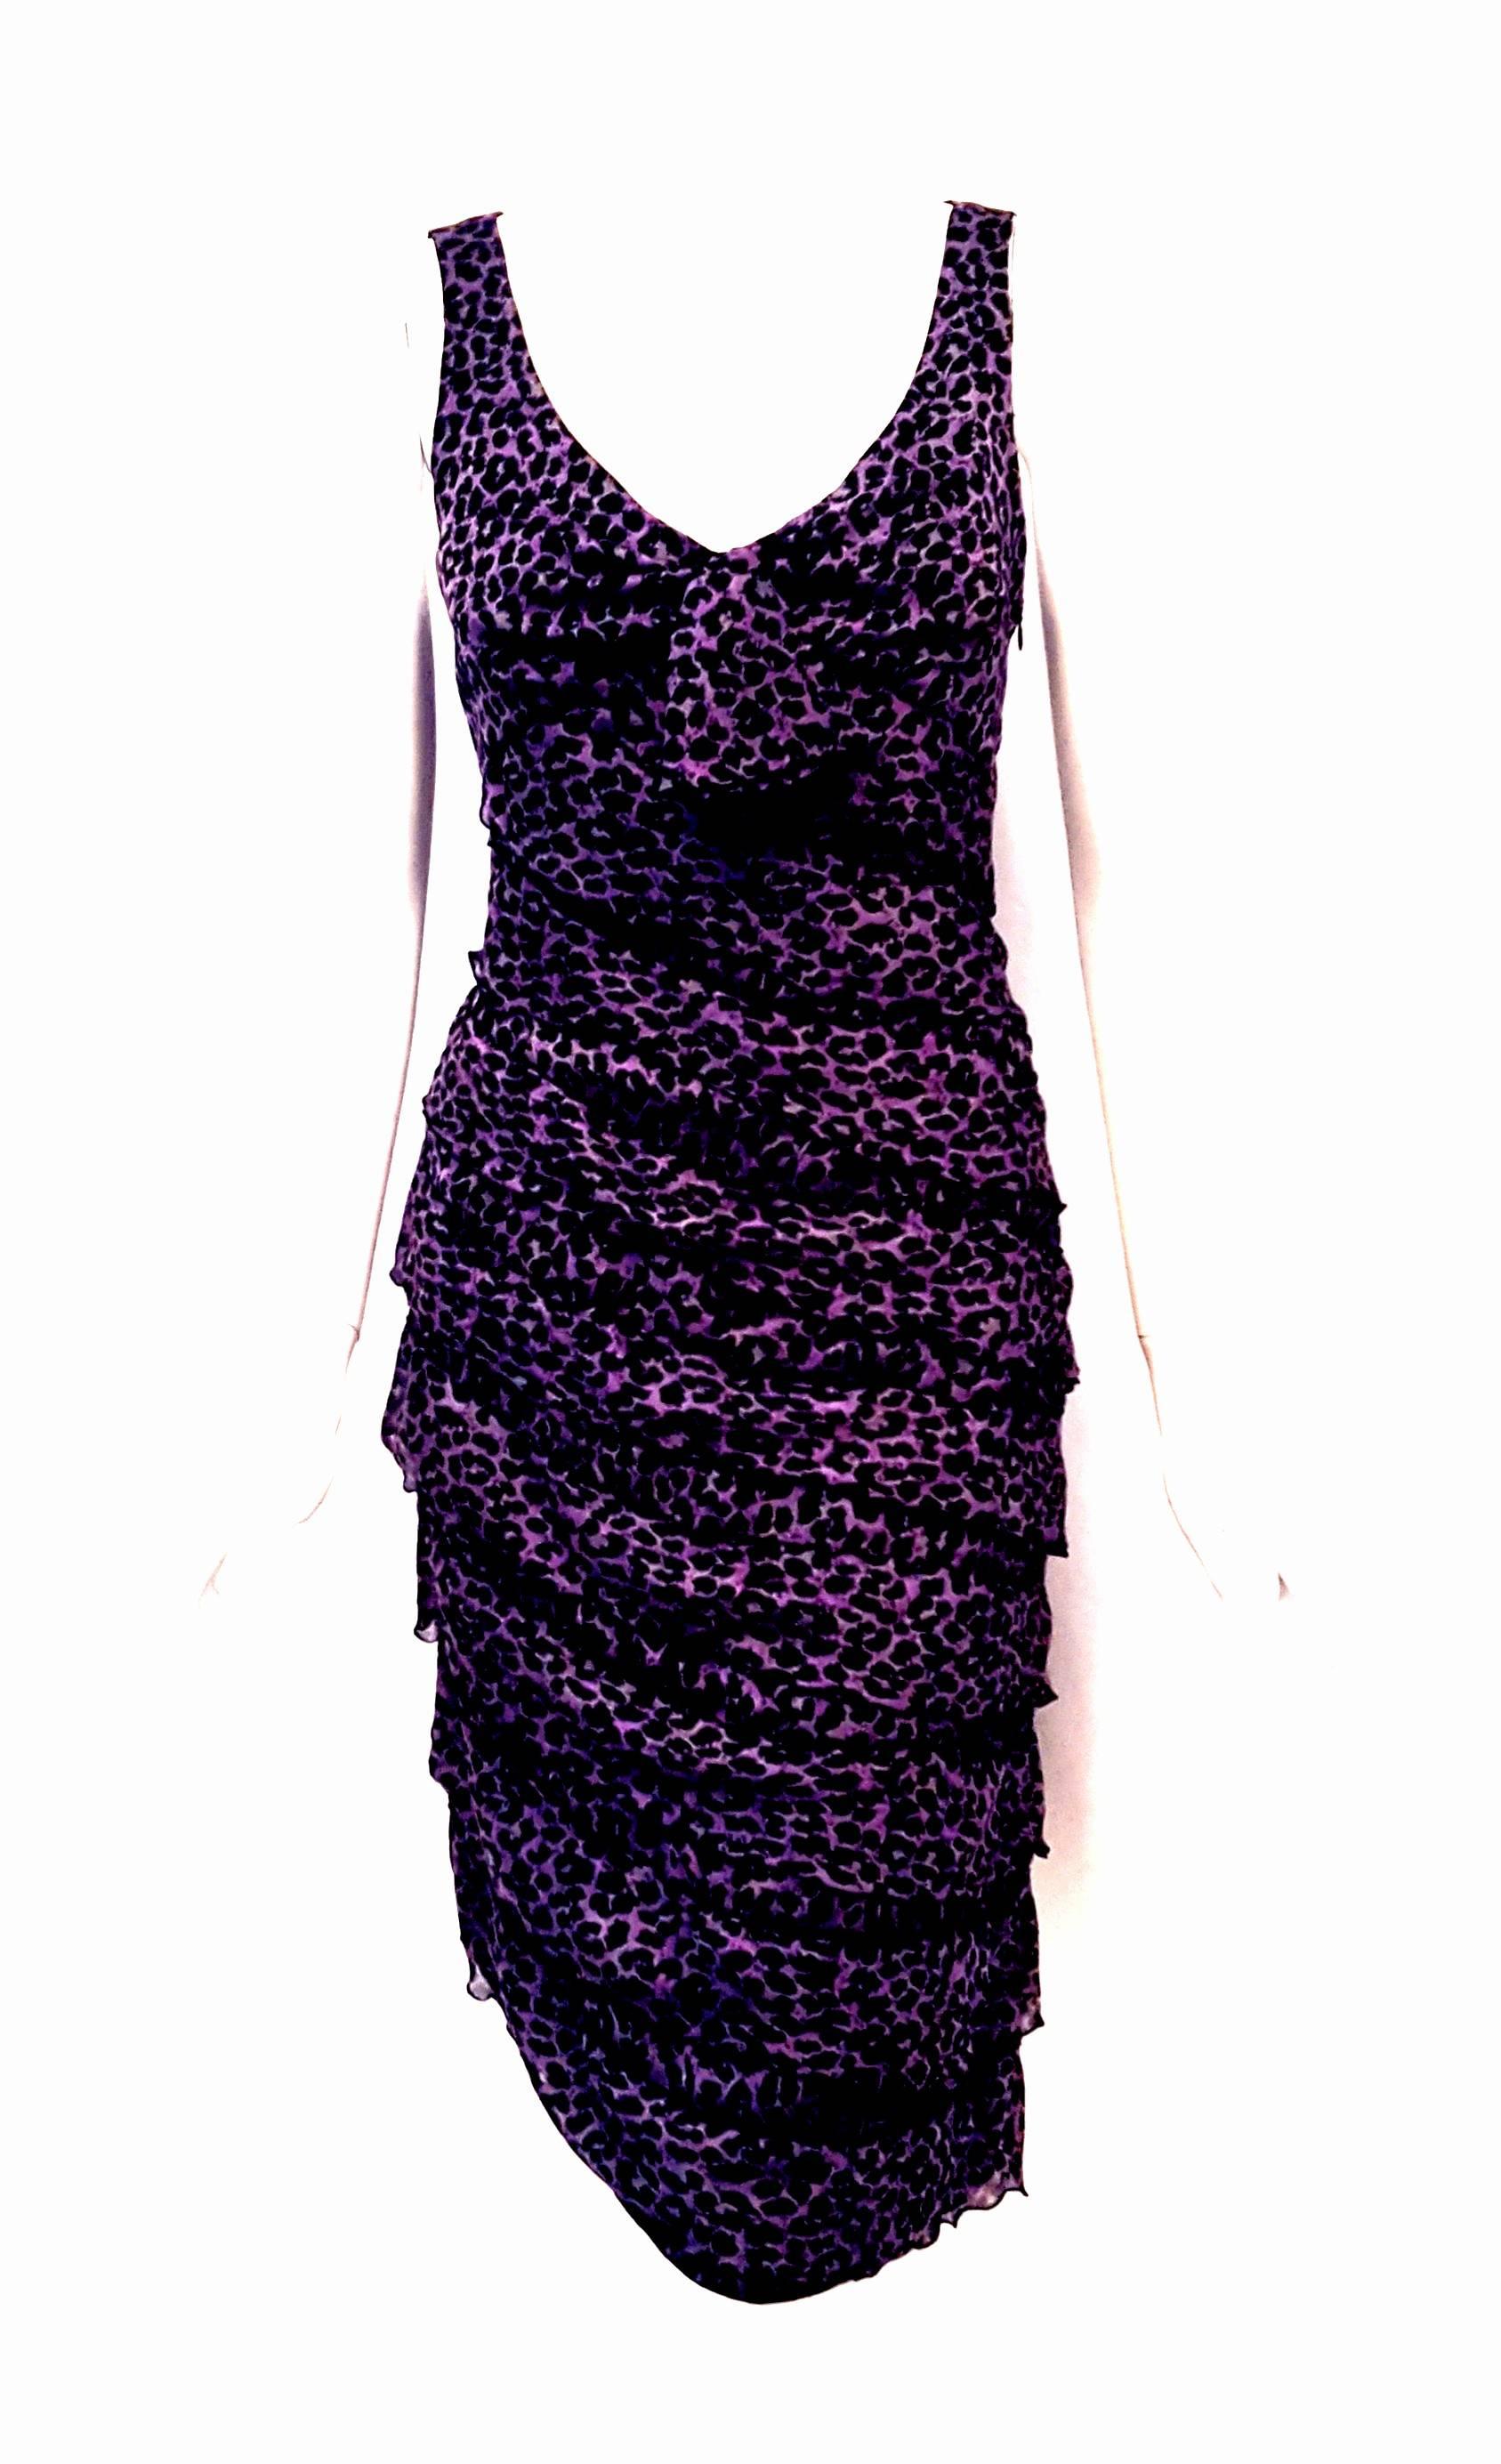 This Giorgio Armani silk purple and black animal print dress is absolutely the perfect dress for summer.  This sleeveless silk dress with its tiered ruffles is lightweight and flowy.   Sexy and beautifully tailored, it contains a side zipper for